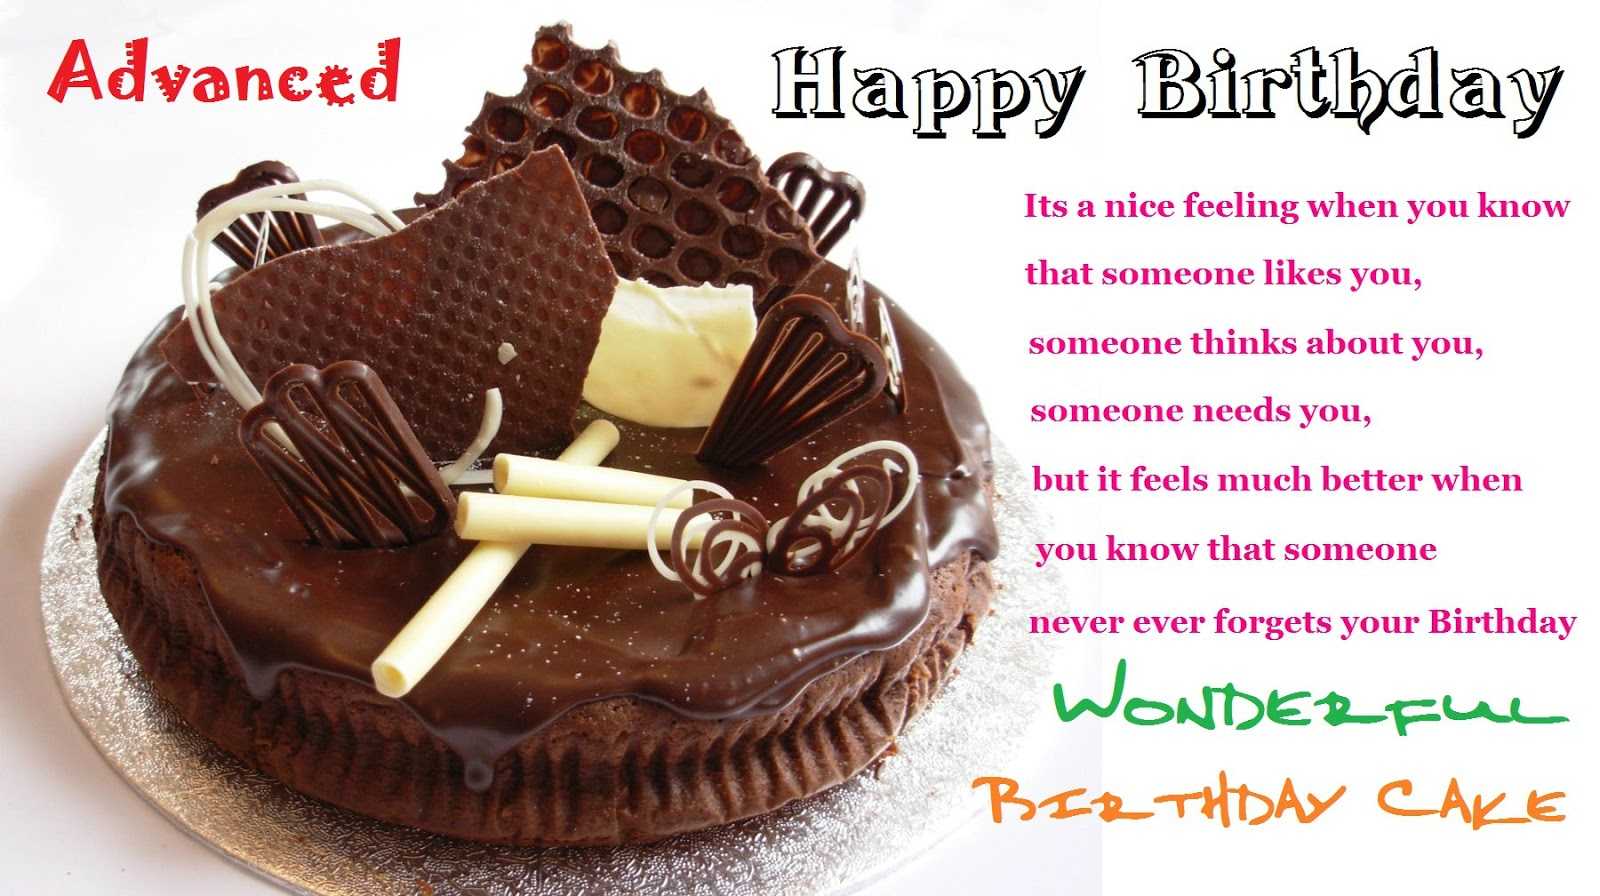 advance happy birthday wishes images download